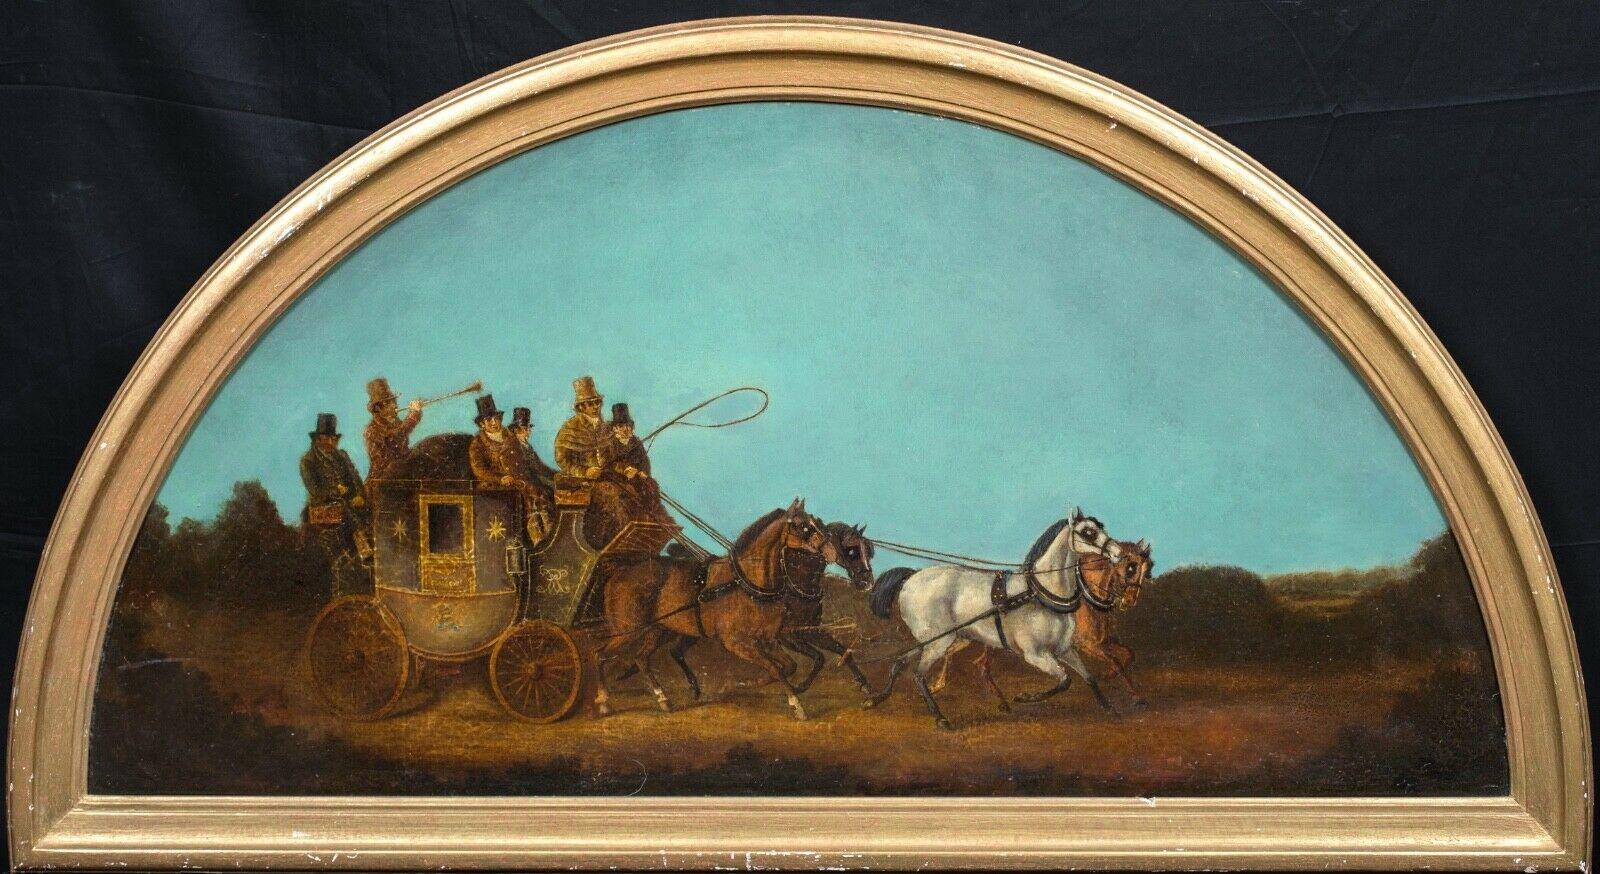 Unknown Portrait Painting - The Night Royal Mail Coach To London, 19th Century